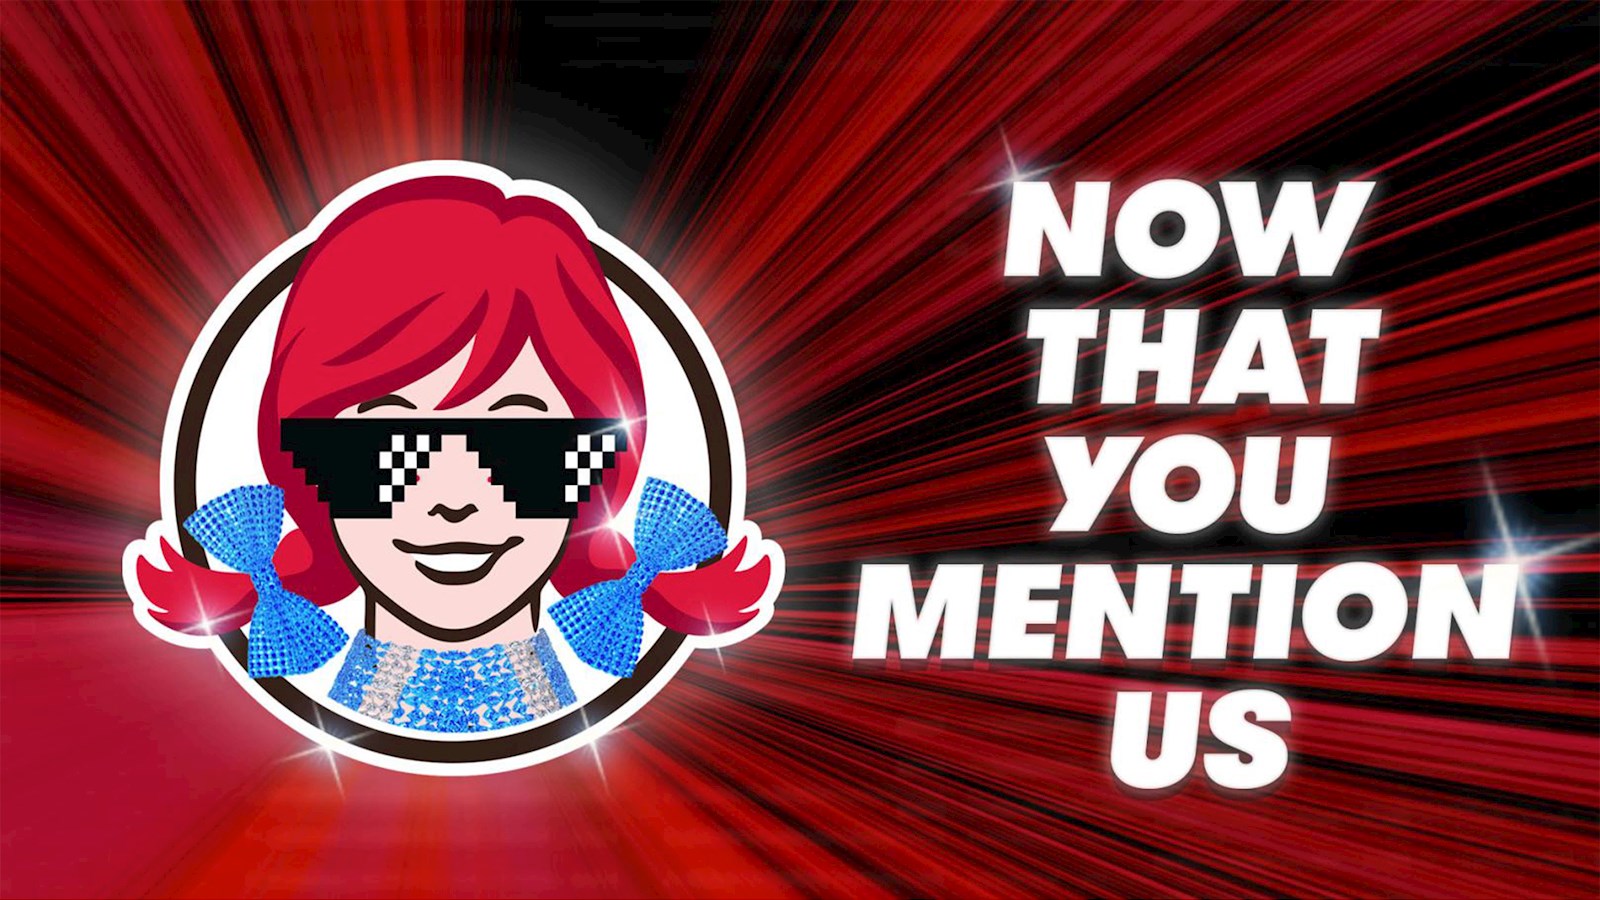 Wendy's logo with sunglasses on and text saying 'now that you mention us' 